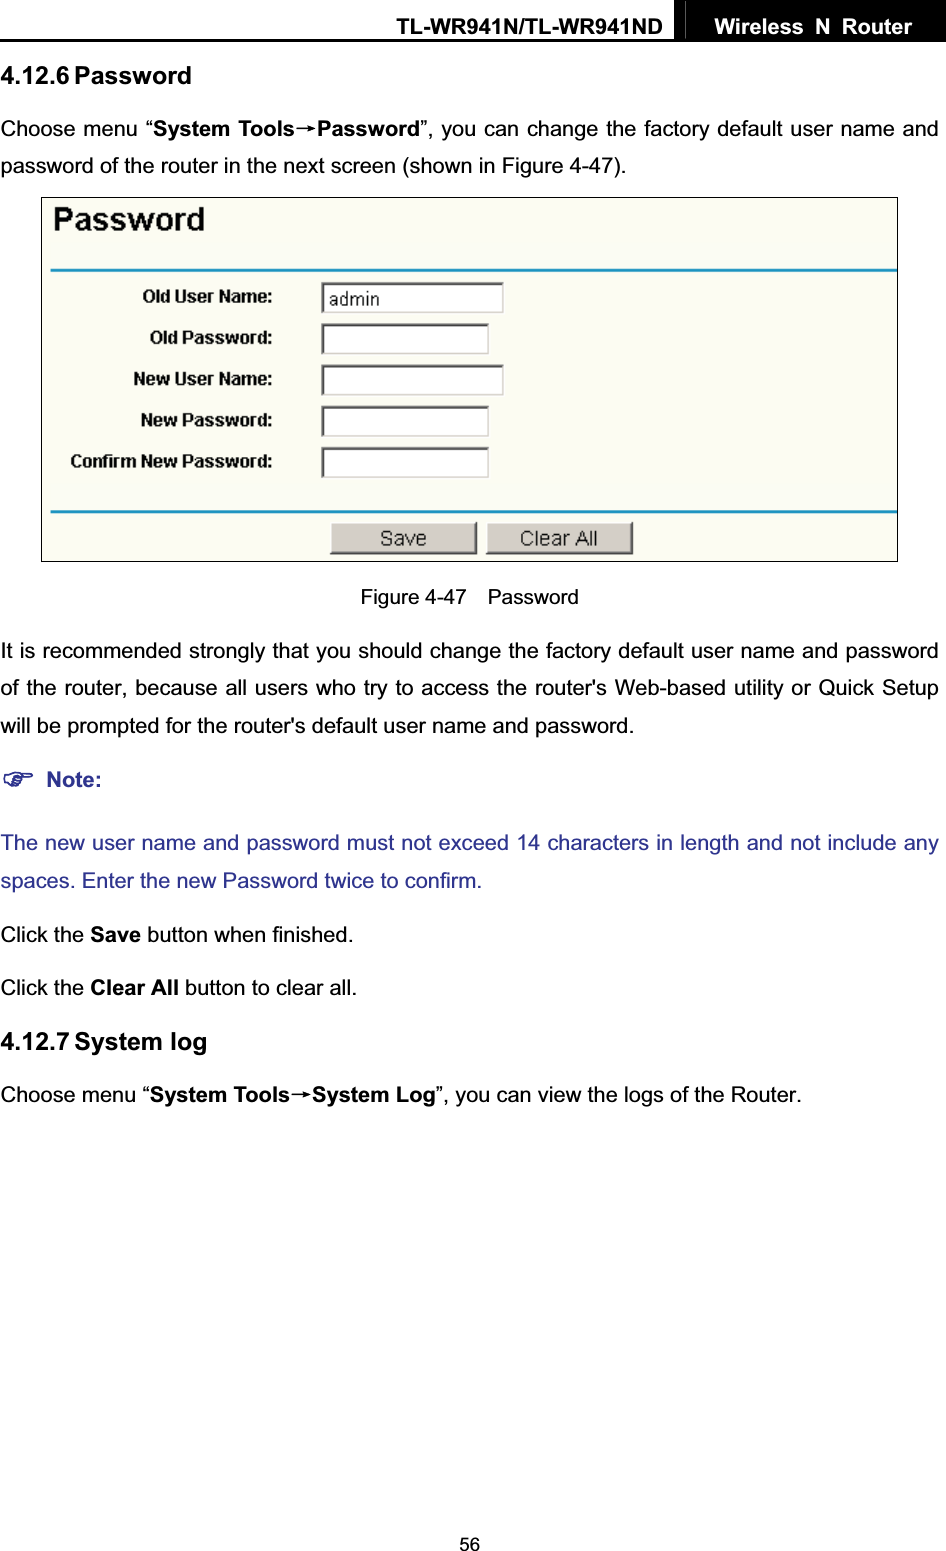 TL-WR941N/TL-WR941ND  Wireless N Router  564.12.6 Password Choose menu “System ToolsėPassword”, you can change the factory default user name and password of the router in the next screen (shown in Figure 4-47). Figure 4-47  Password It is recommended strongly that you should change the factory default user name and password of the router, because all users who try to access the router&apos;s Web-based utility or Quick Setup will be prompted for the router&apos;s default user name and password. )Note:The new user name and password must not exceed 14 characters in length and not include any spaces. Enter the new Password twice to confirm. Click the Save button when finished. Click the Clear All button to clear all. 4.12.7 System log Choose menu “System ToolsėSystem Log”, you can view the logs of the Router. 